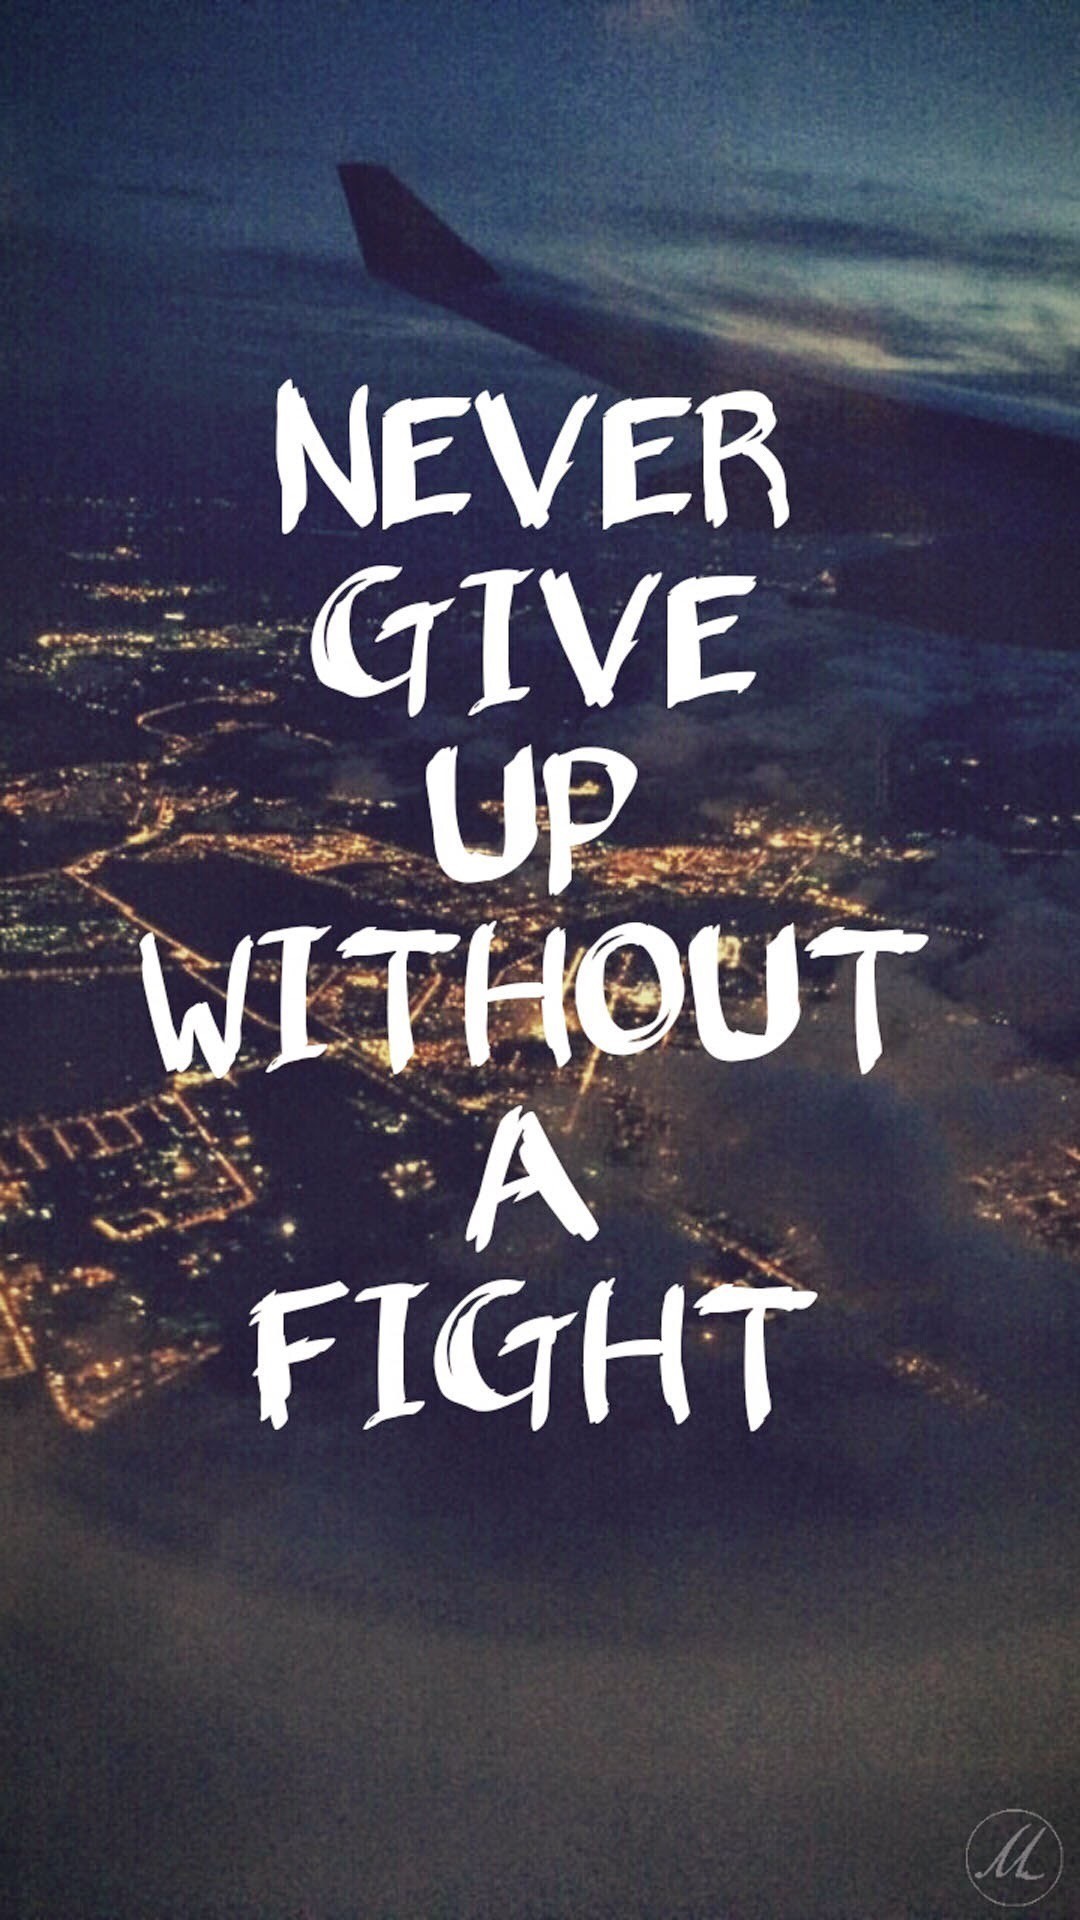 never give up wallpaper,font,text,sky,landscape,photography